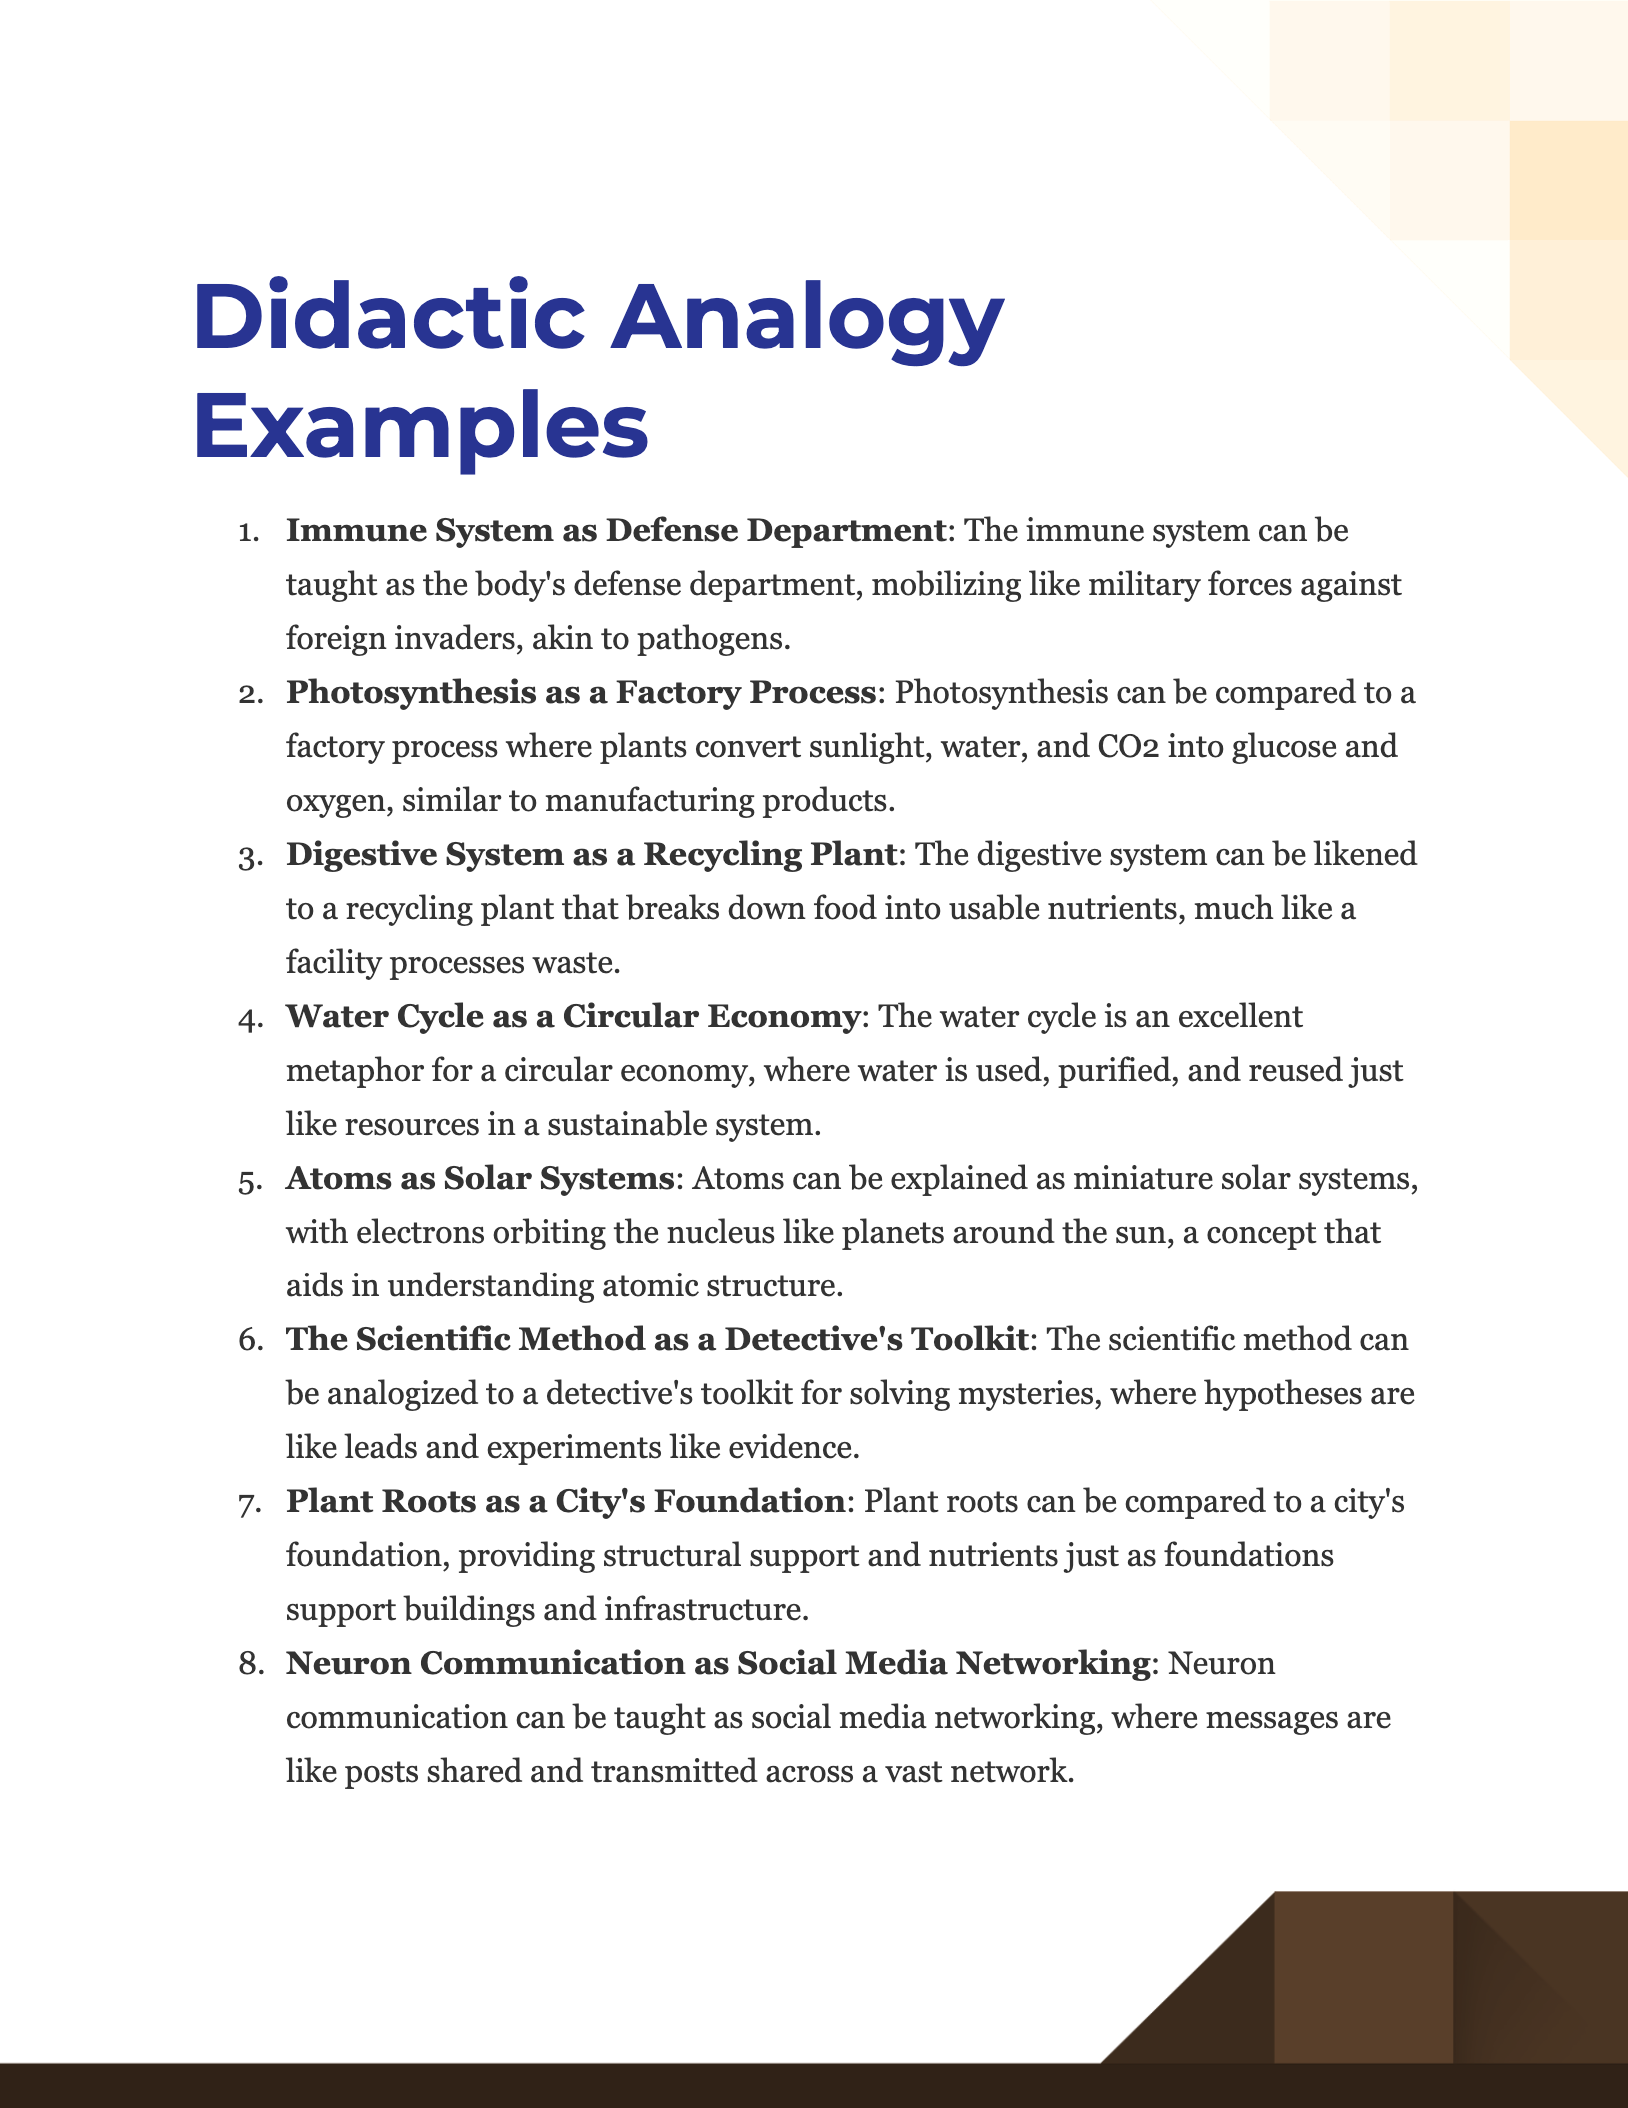 Didactic Analogy Examples